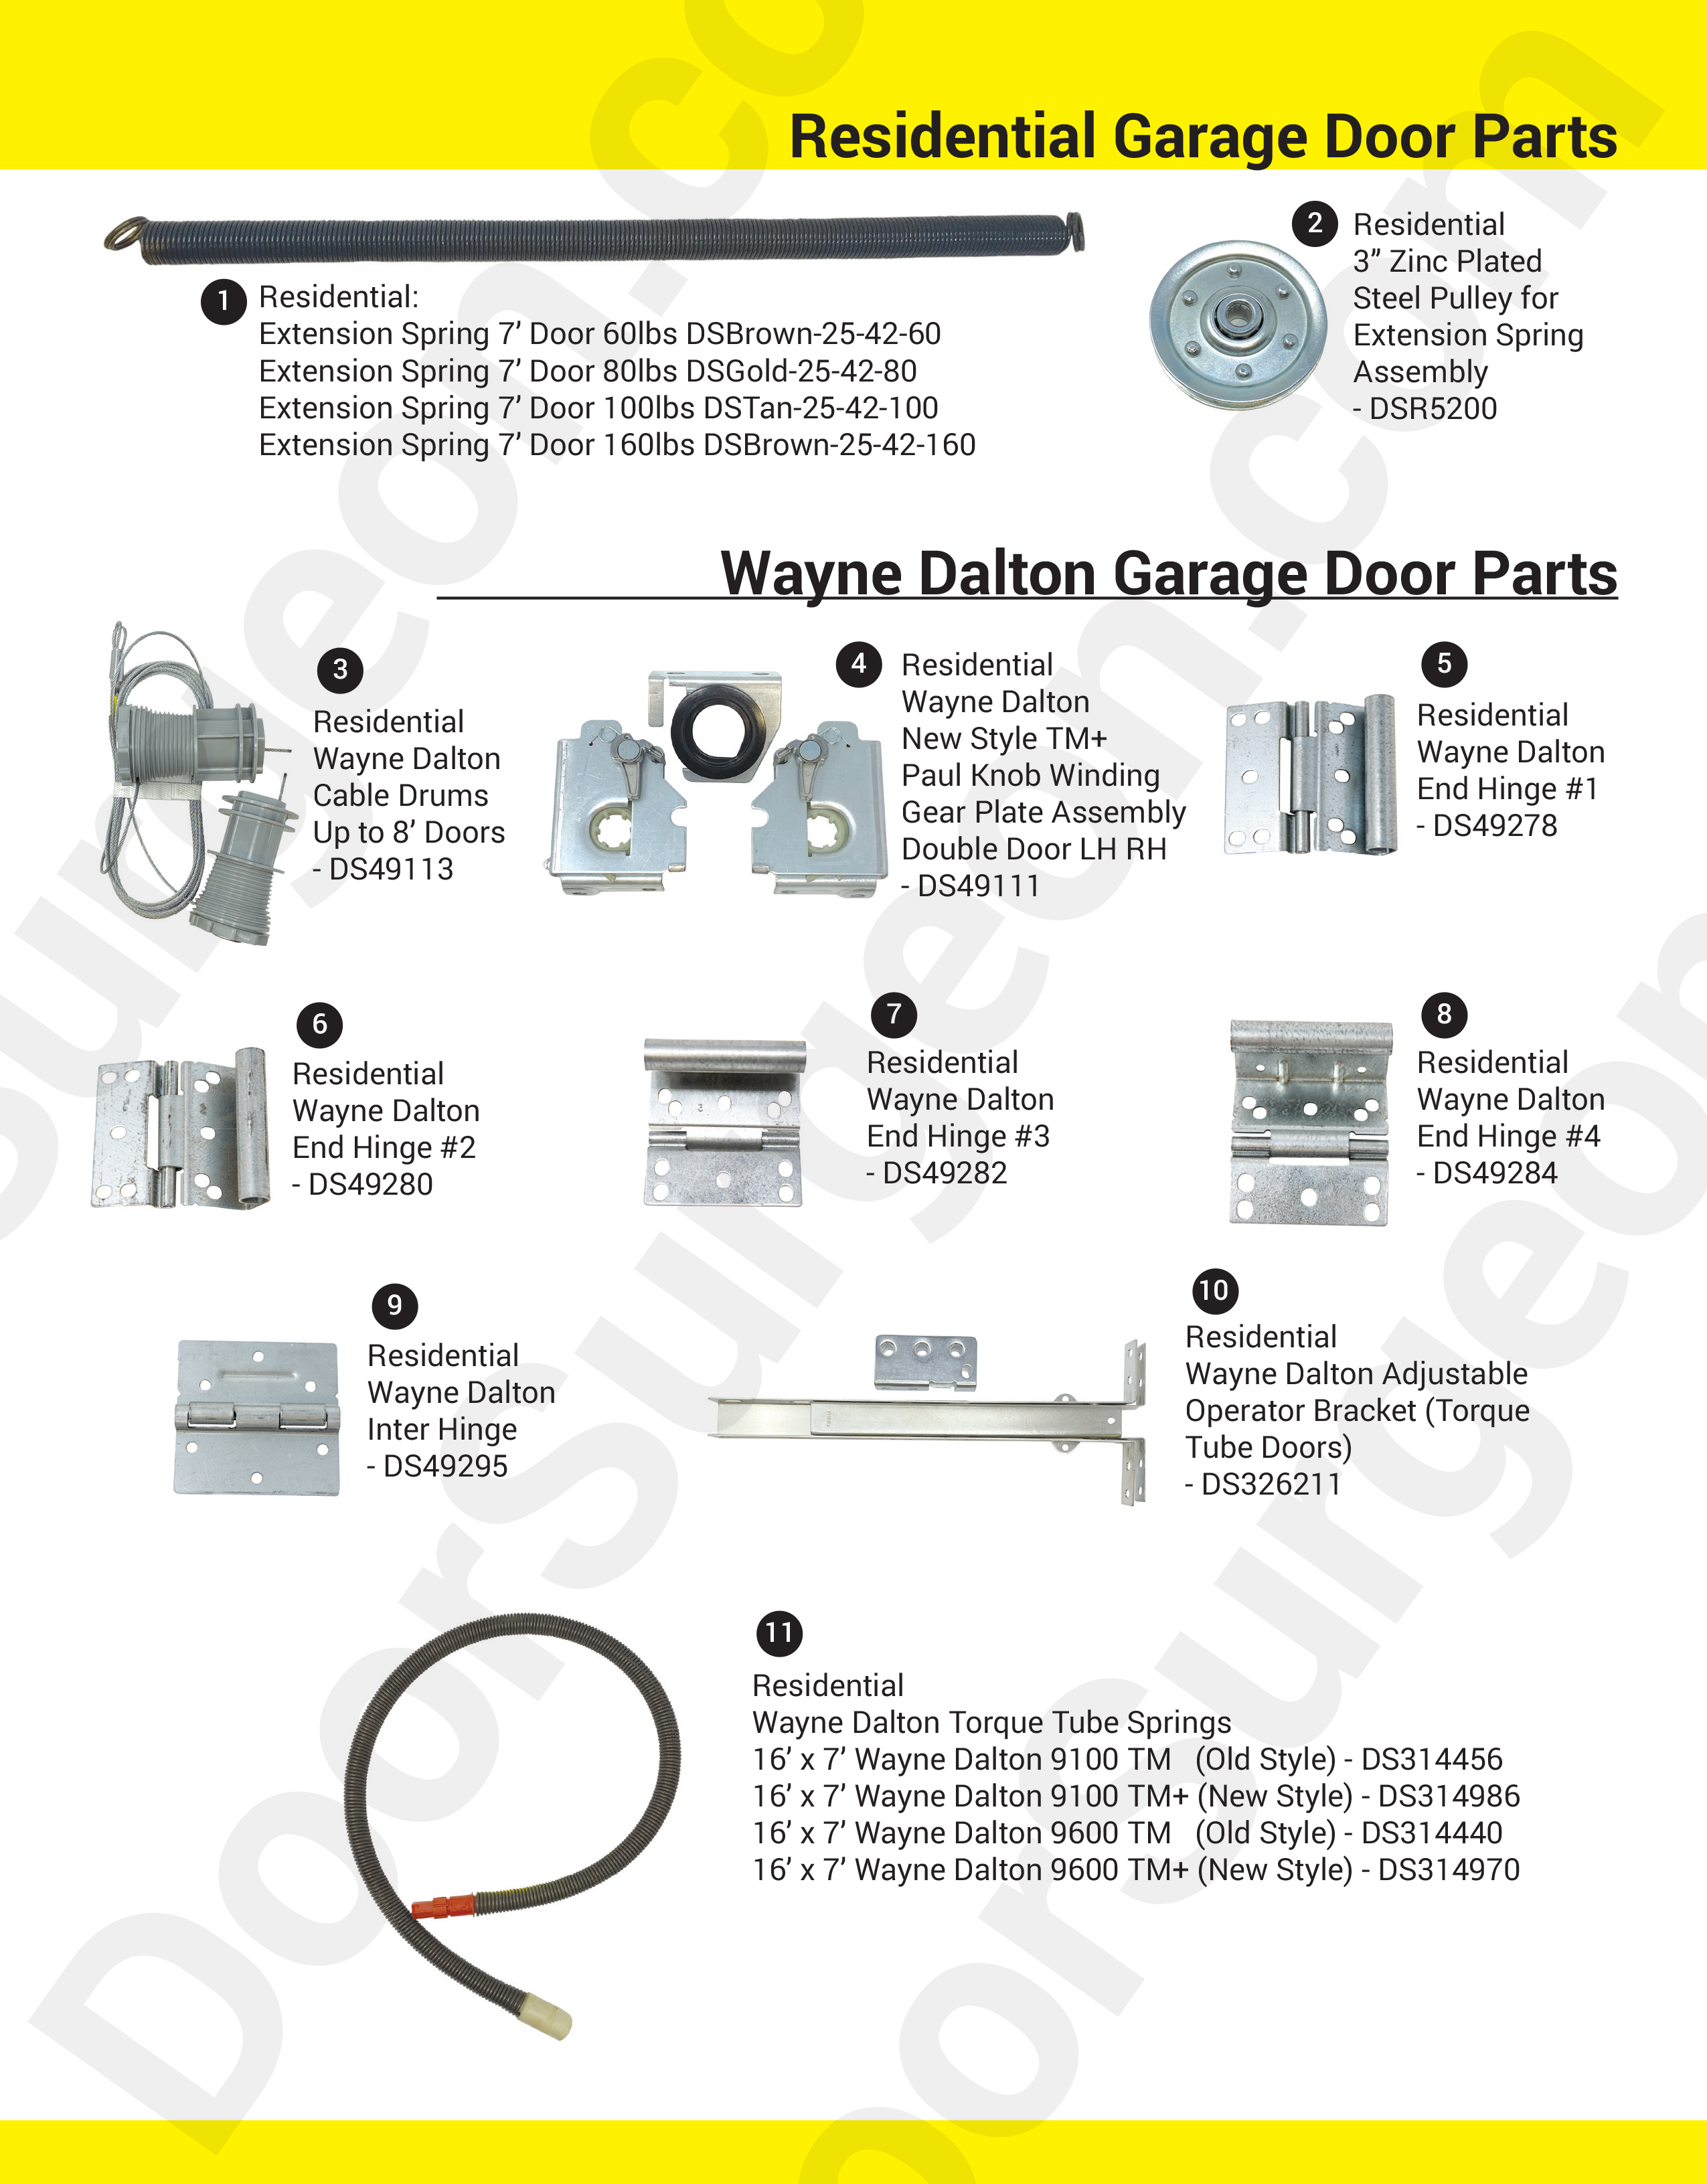 Door Surgeon replacement parts for residential home garage doors large variety.